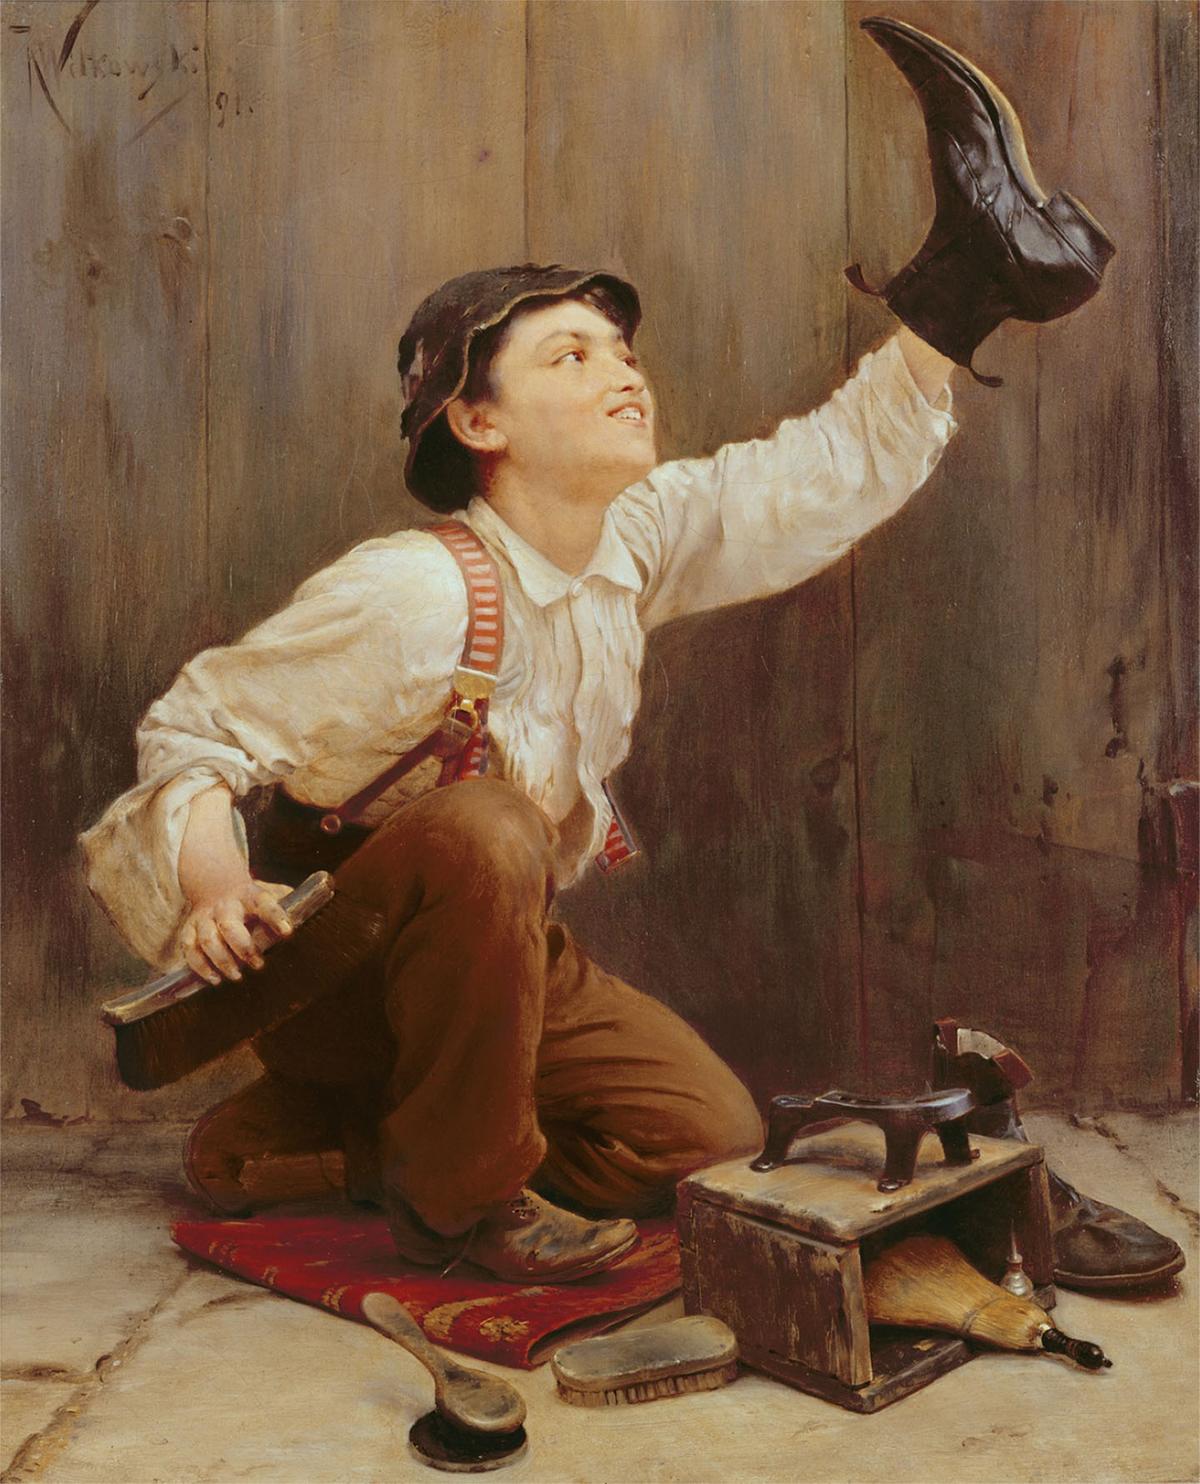 Alger wrote tales of street urchins who broke free of their poverty. "Shoeshine Boy," 1891, by Karl Witkowski. Oil on canvas. Private Collection. (Public Domain)